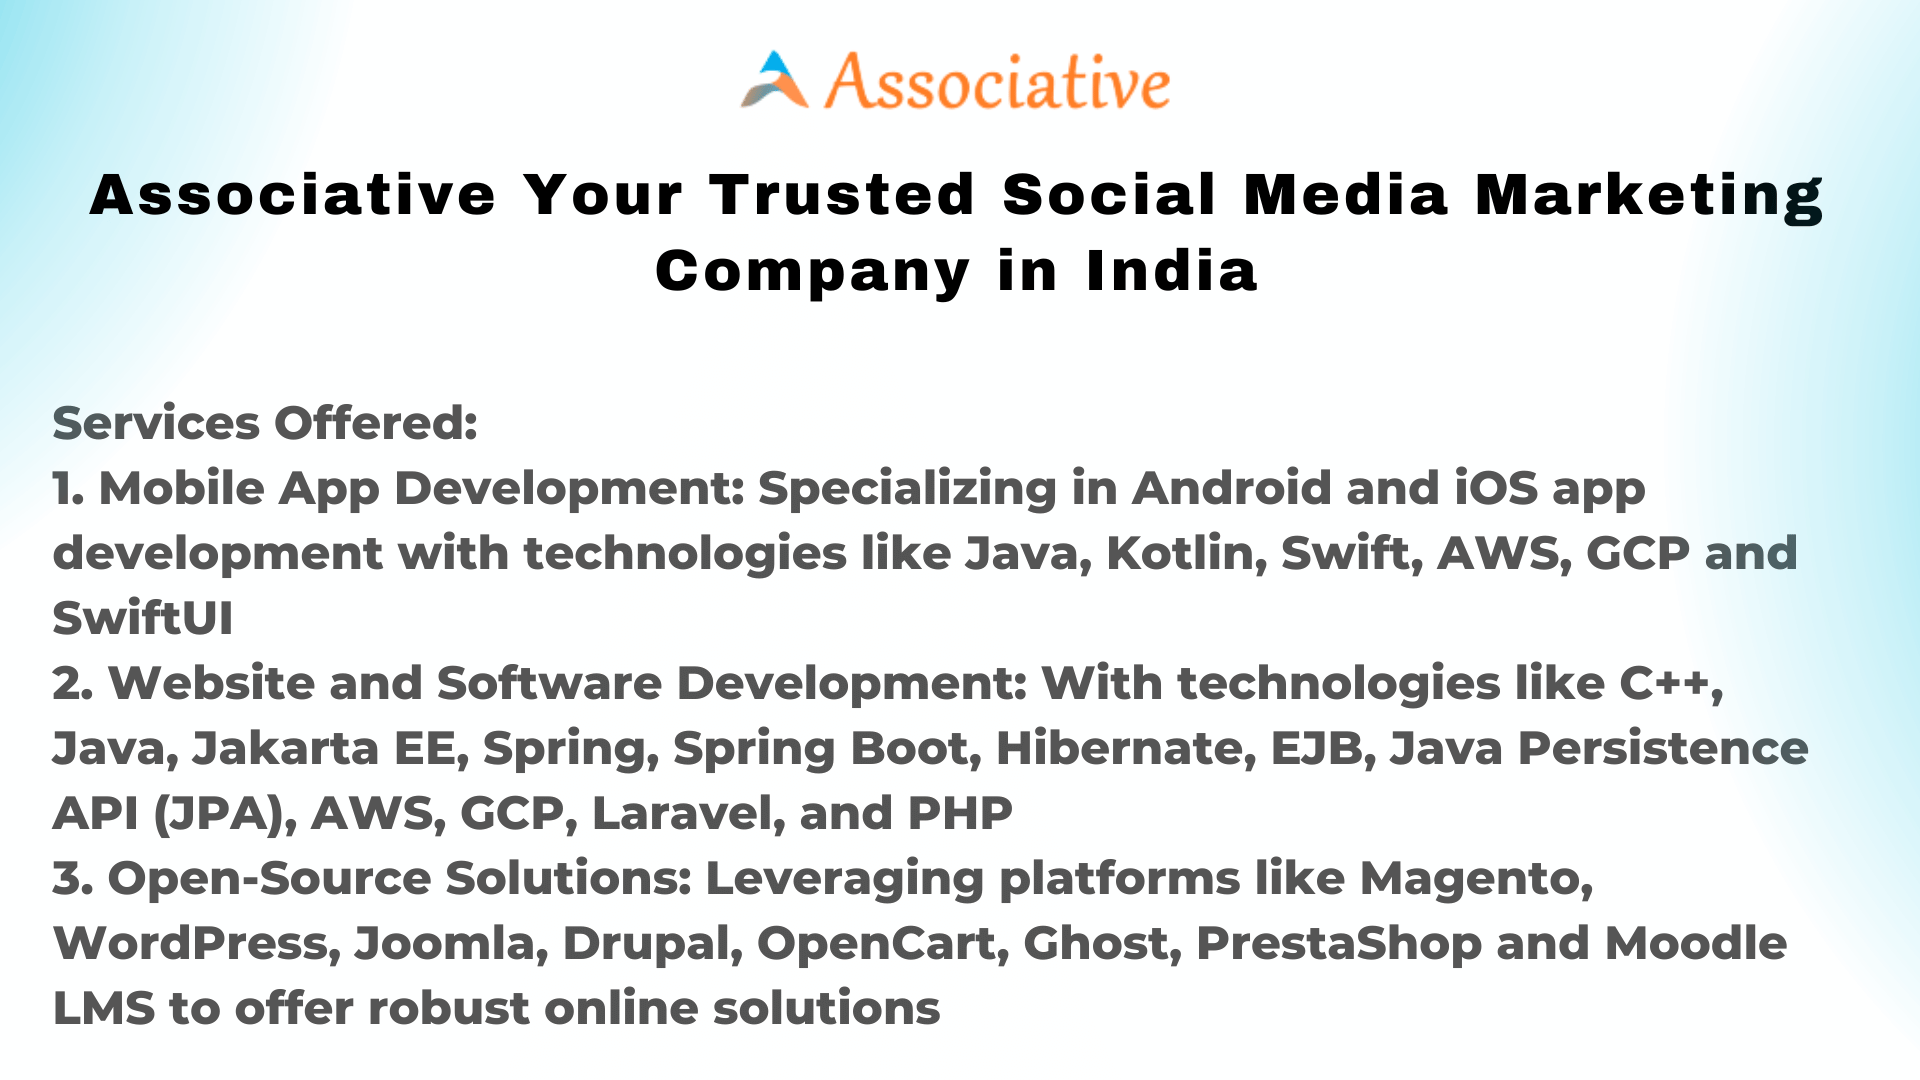 Associative Your Trusted Social Media Marketing Company in India